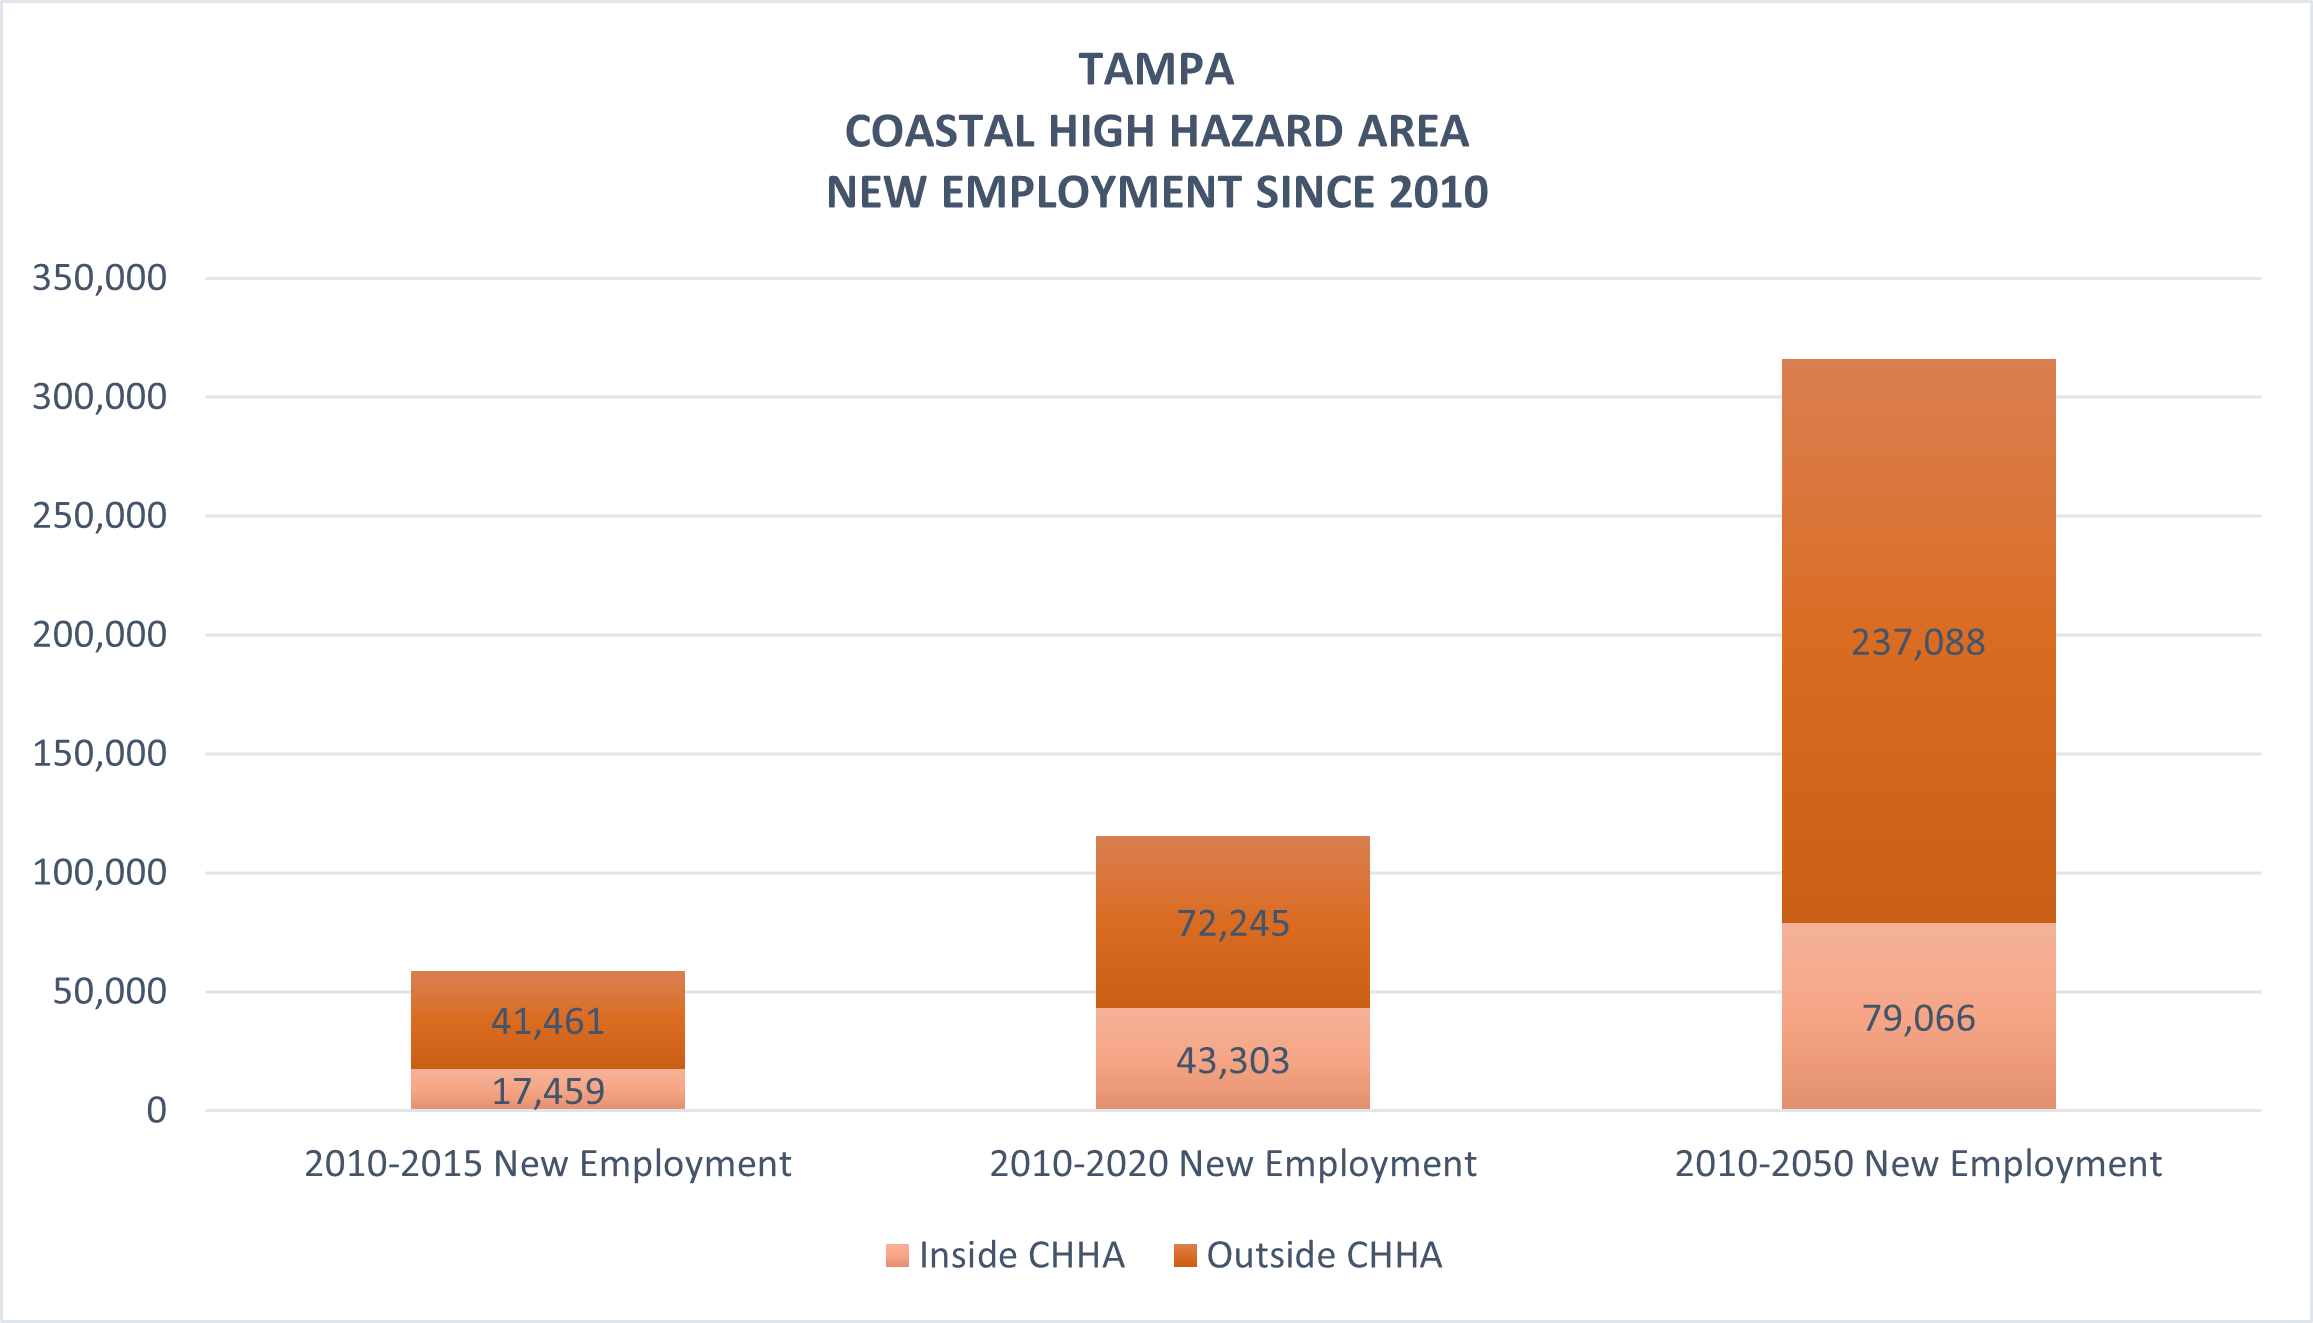 This chart shows Tampa's new jobs inside and outside the CHHA. From 2010 to 2020, 43,303 new jobs moved inside the CHHA and 72,245 new jobs moved outside CHHA. From 2010 to 2050, 79,066 new jobs are expected to move inside the CHHA and 237,088 new jobs are expected to move outside the CHHA.